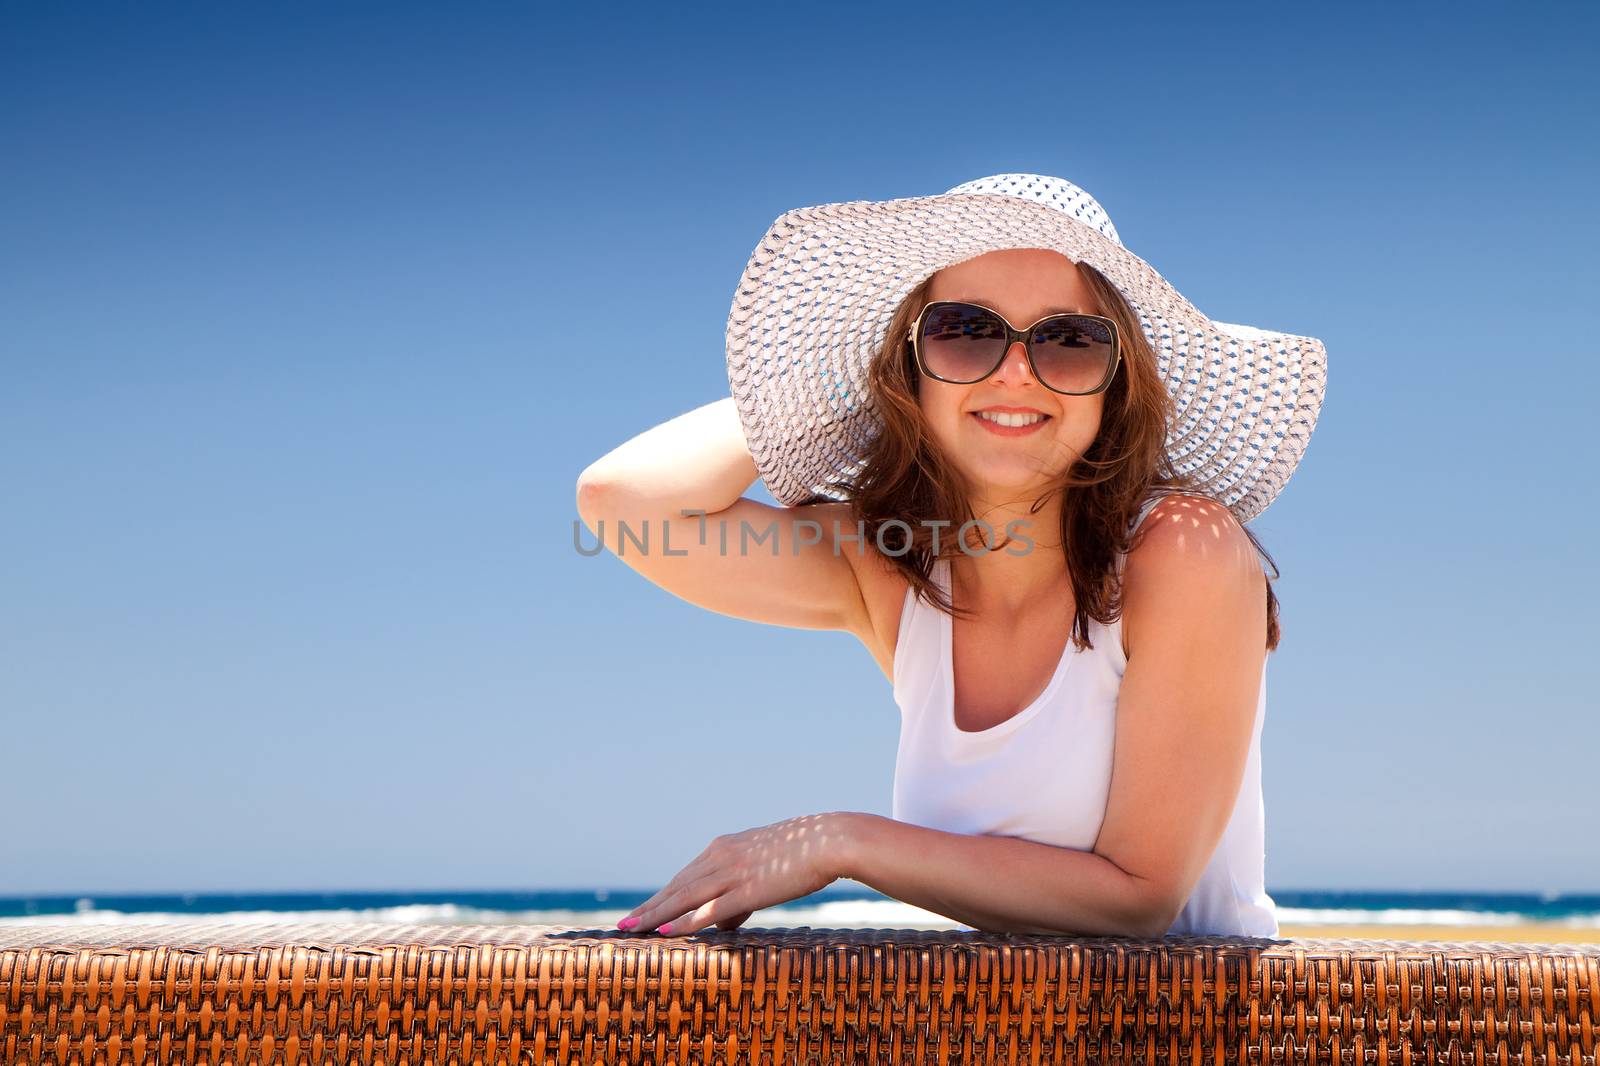 The young beautiful woman in a hat on holidays, on a sunny beach